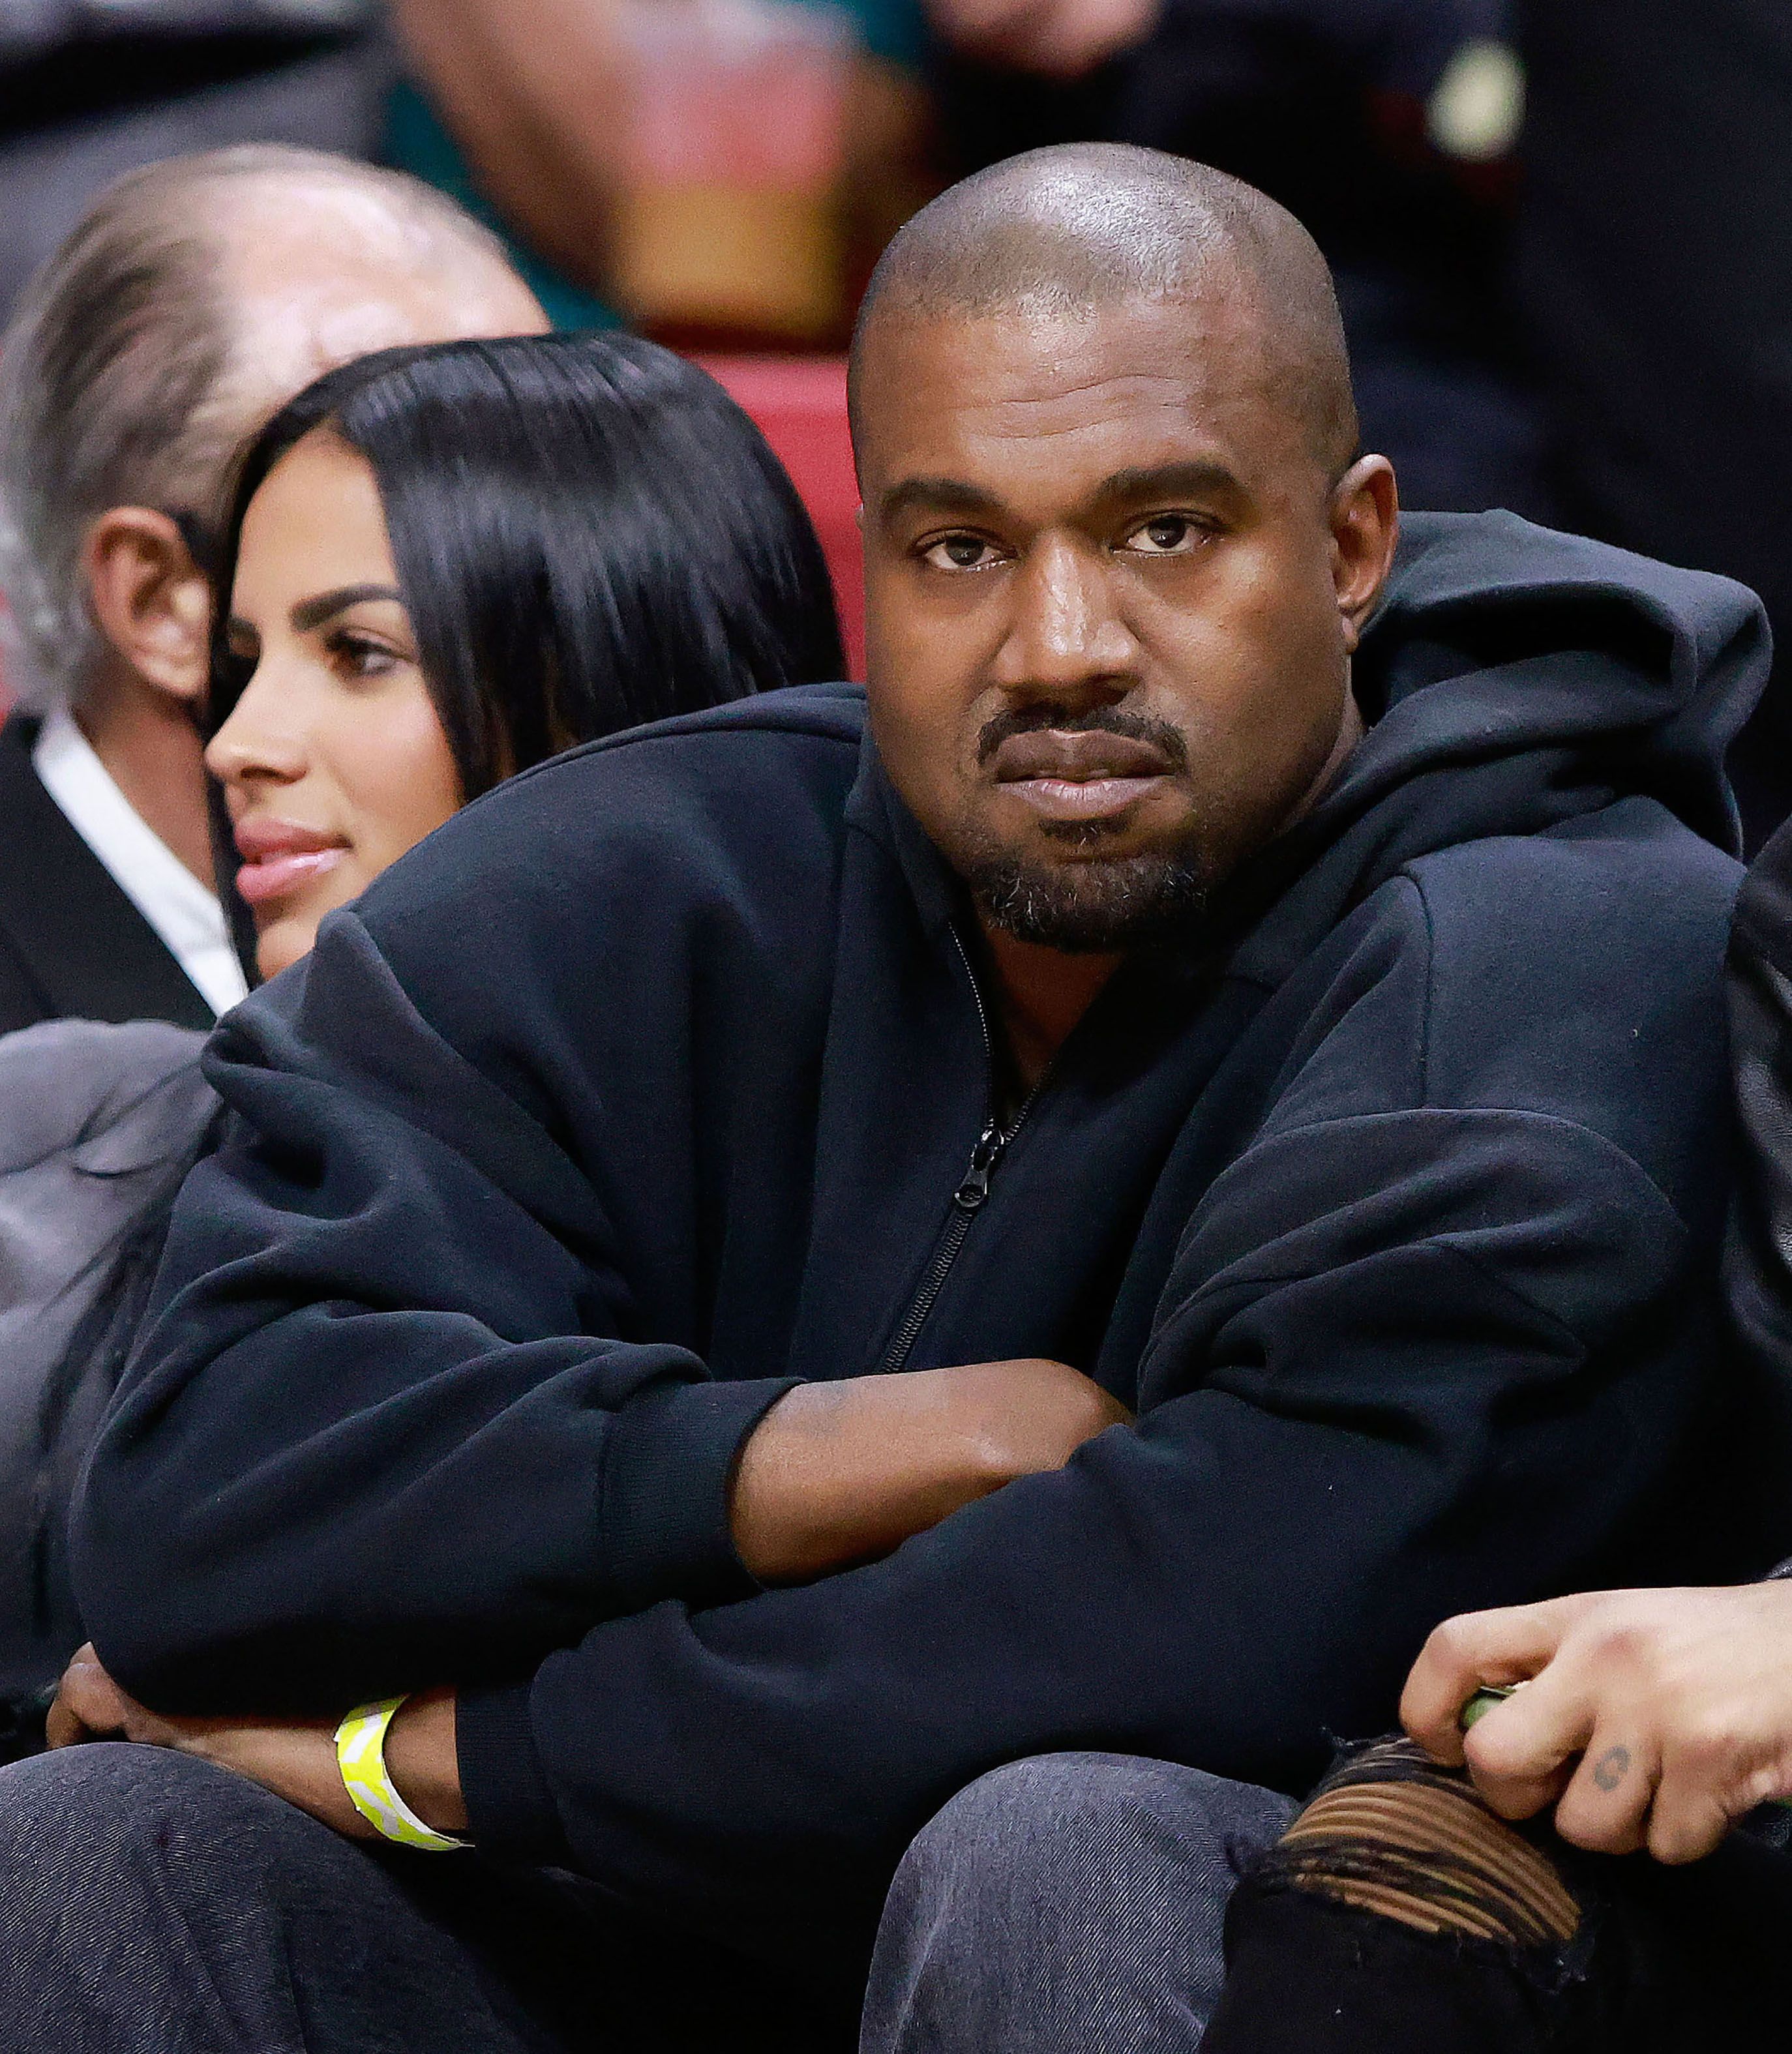 Kanye West watching a Miami Heat vs Minnesota Timberwolves game in March 2022